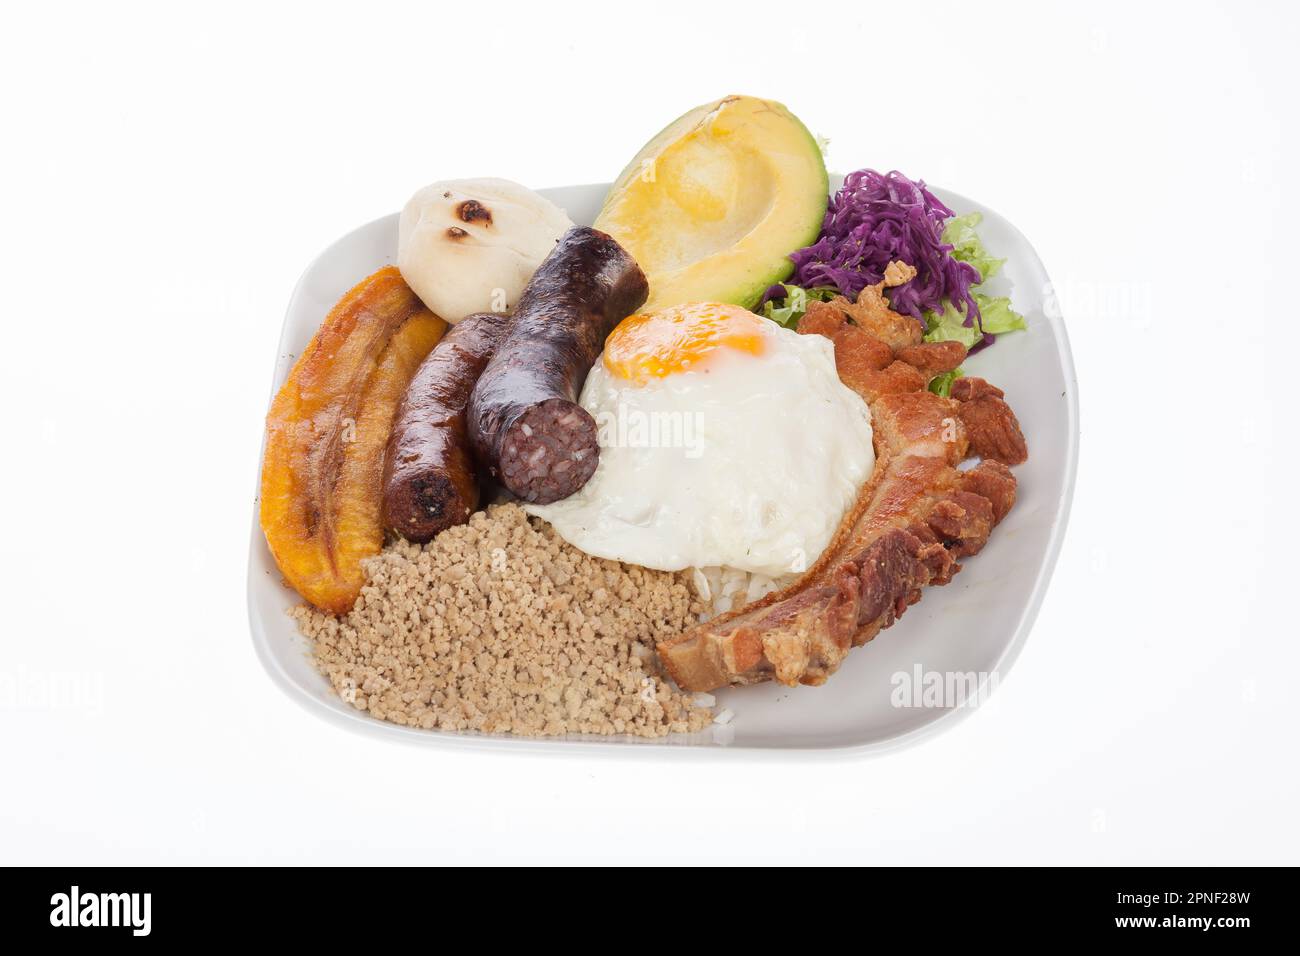 Tasty Paisa Tray; Typical Dish In The Region Of Antioqueña - Colombia. Stock Photo